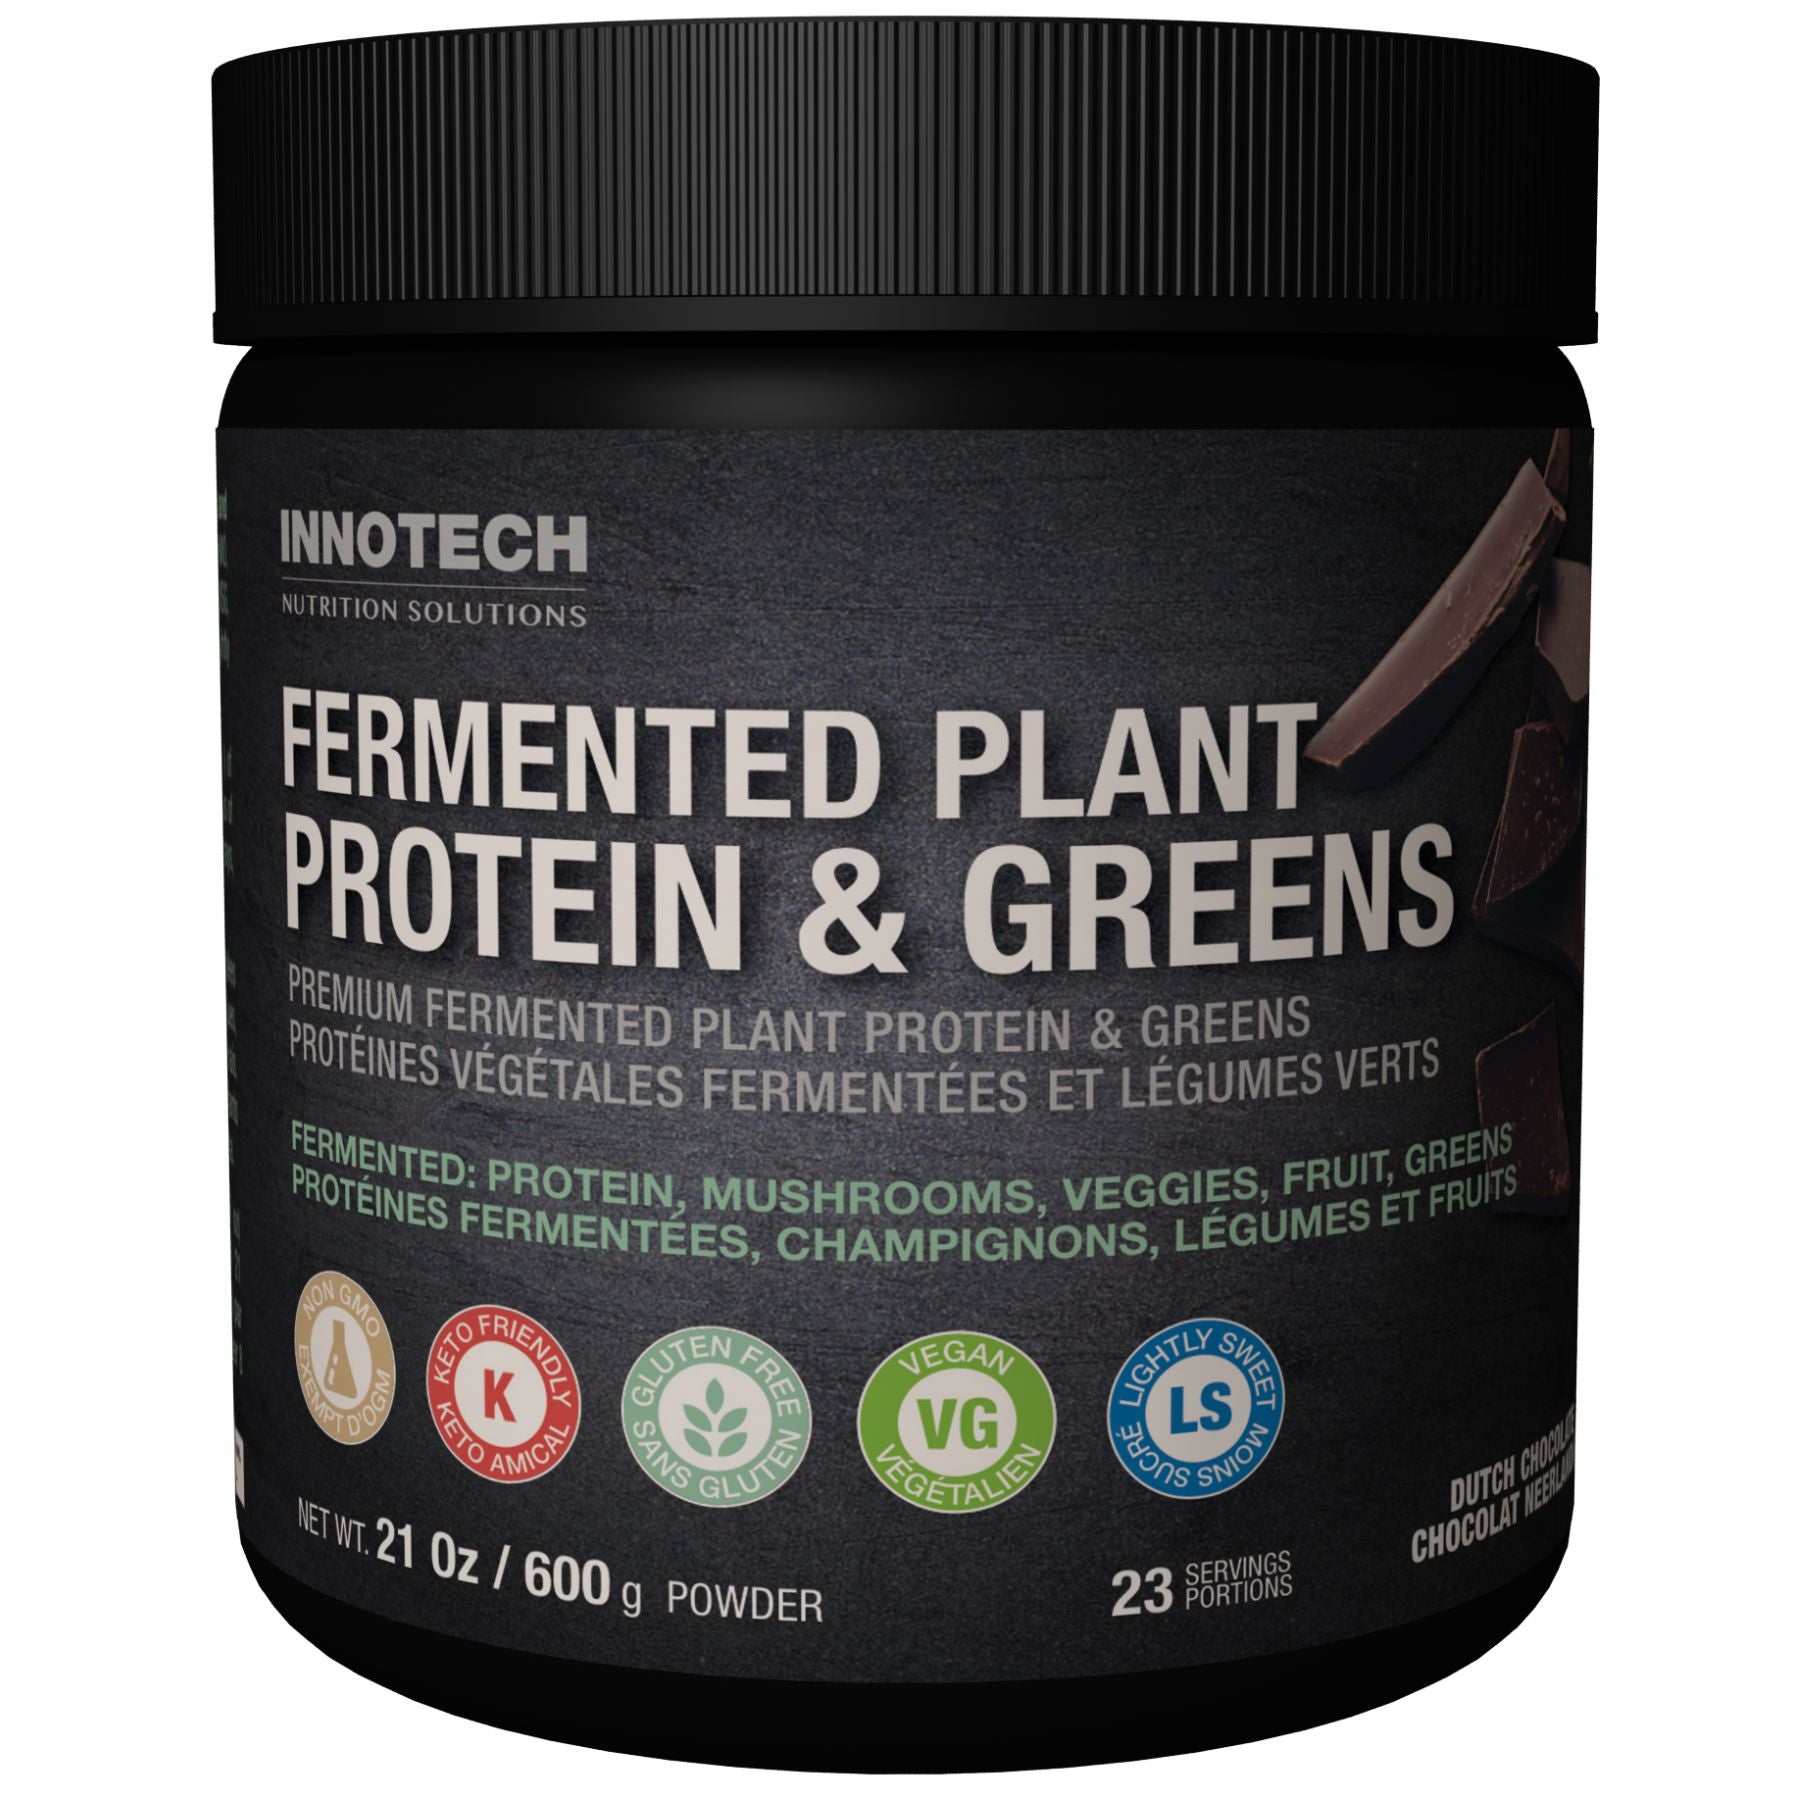 InnoTech Fermented Plant Protein & Greens - Chocolate 600g